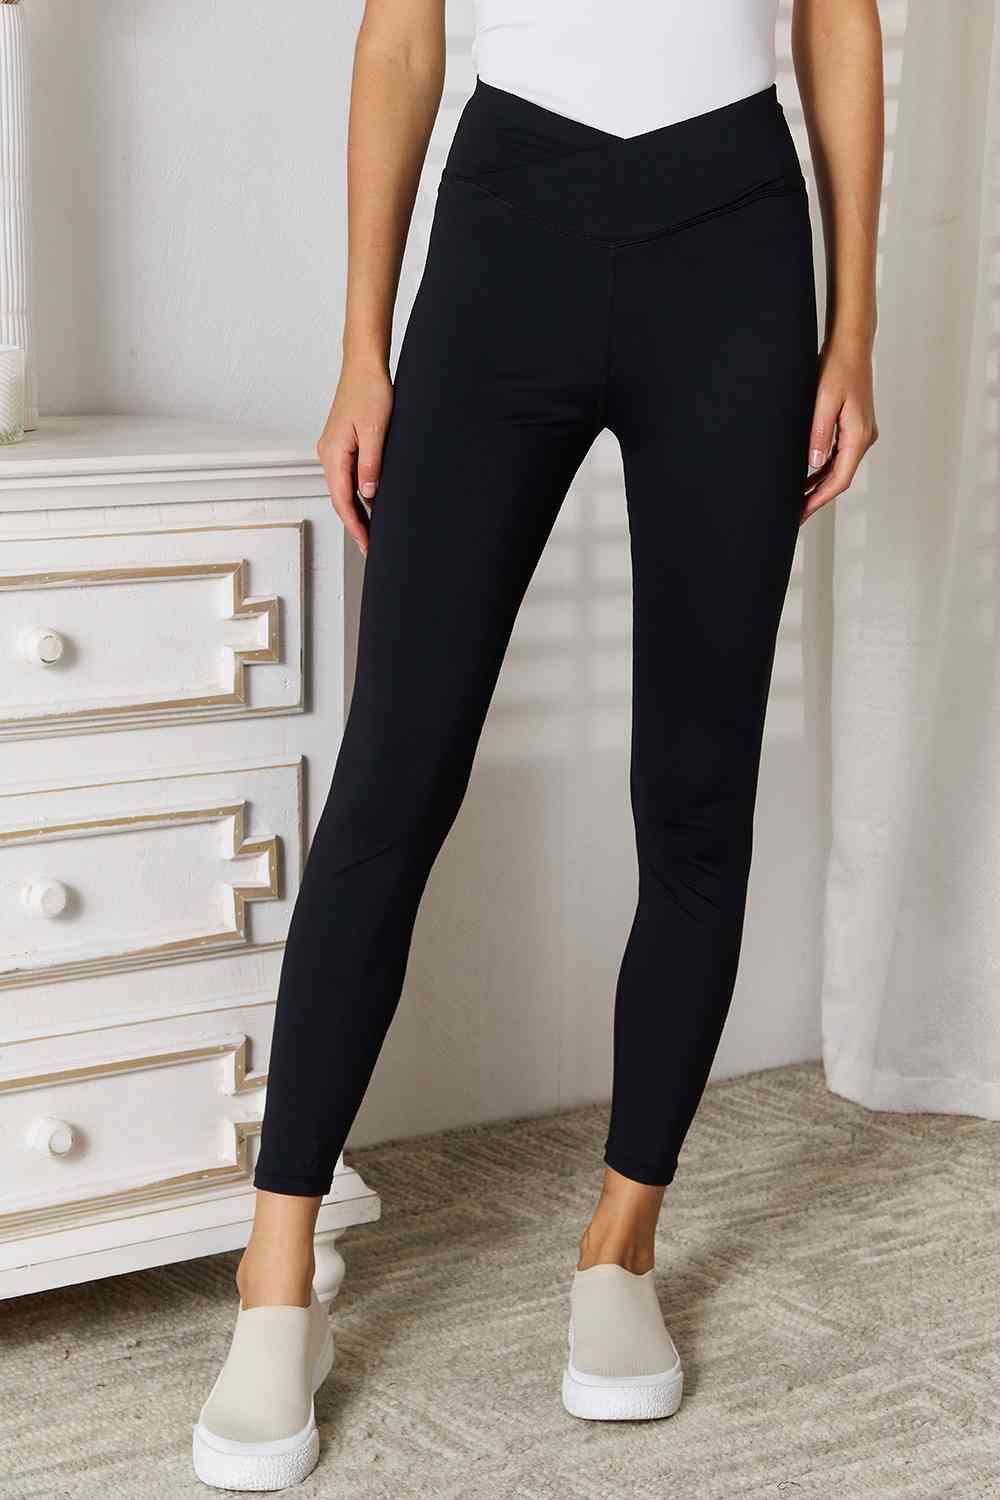 V-Waistband Sports Leggings - Black / S - All Products - Pants - 1 - 2024